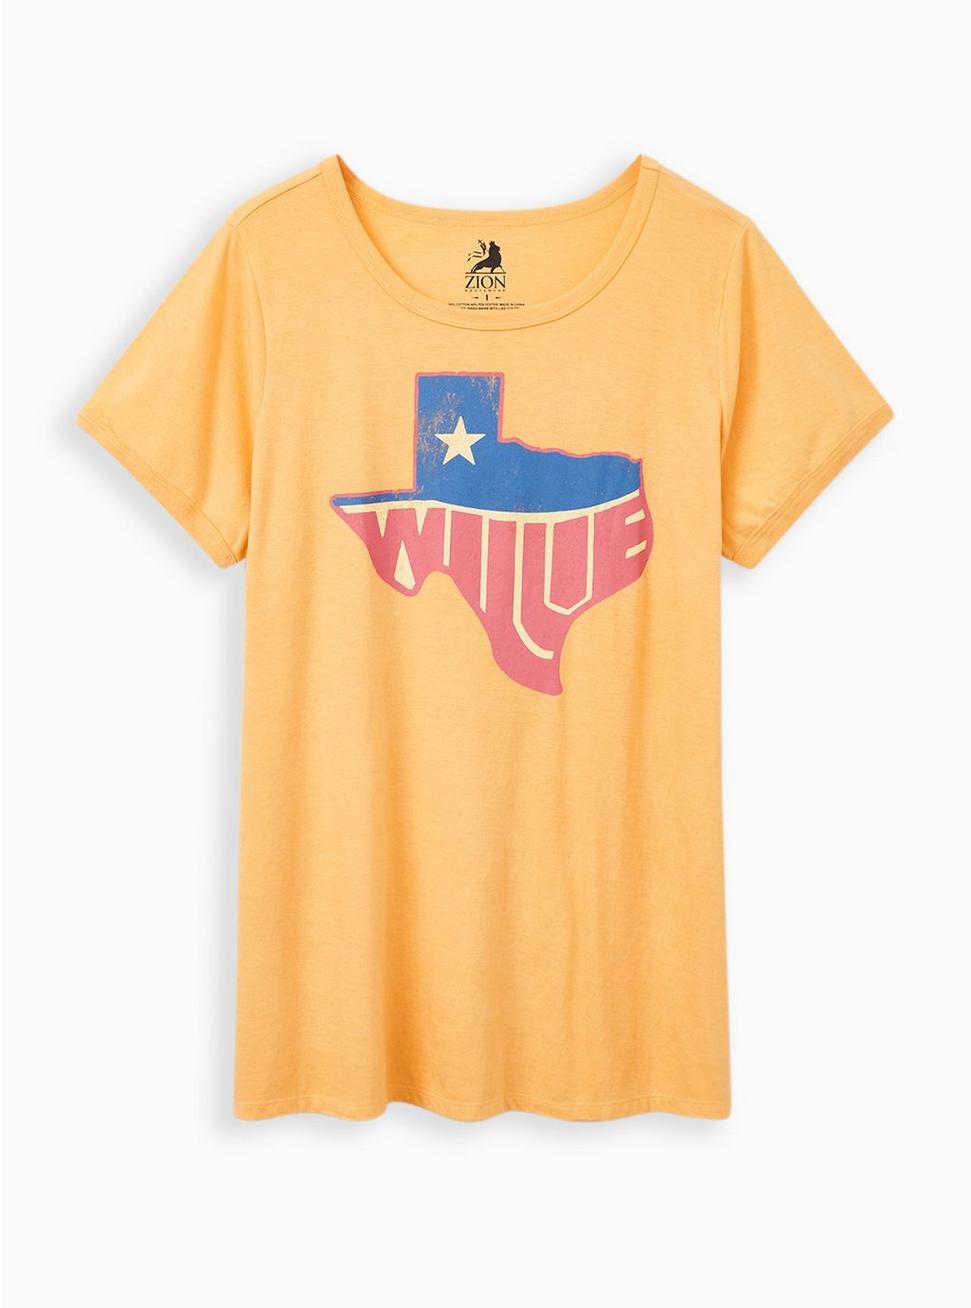 Plus Size Classic Fit Ringer Tee - Willie Nelson Mustard Yellow, MINERAL YELLOW, hi-res